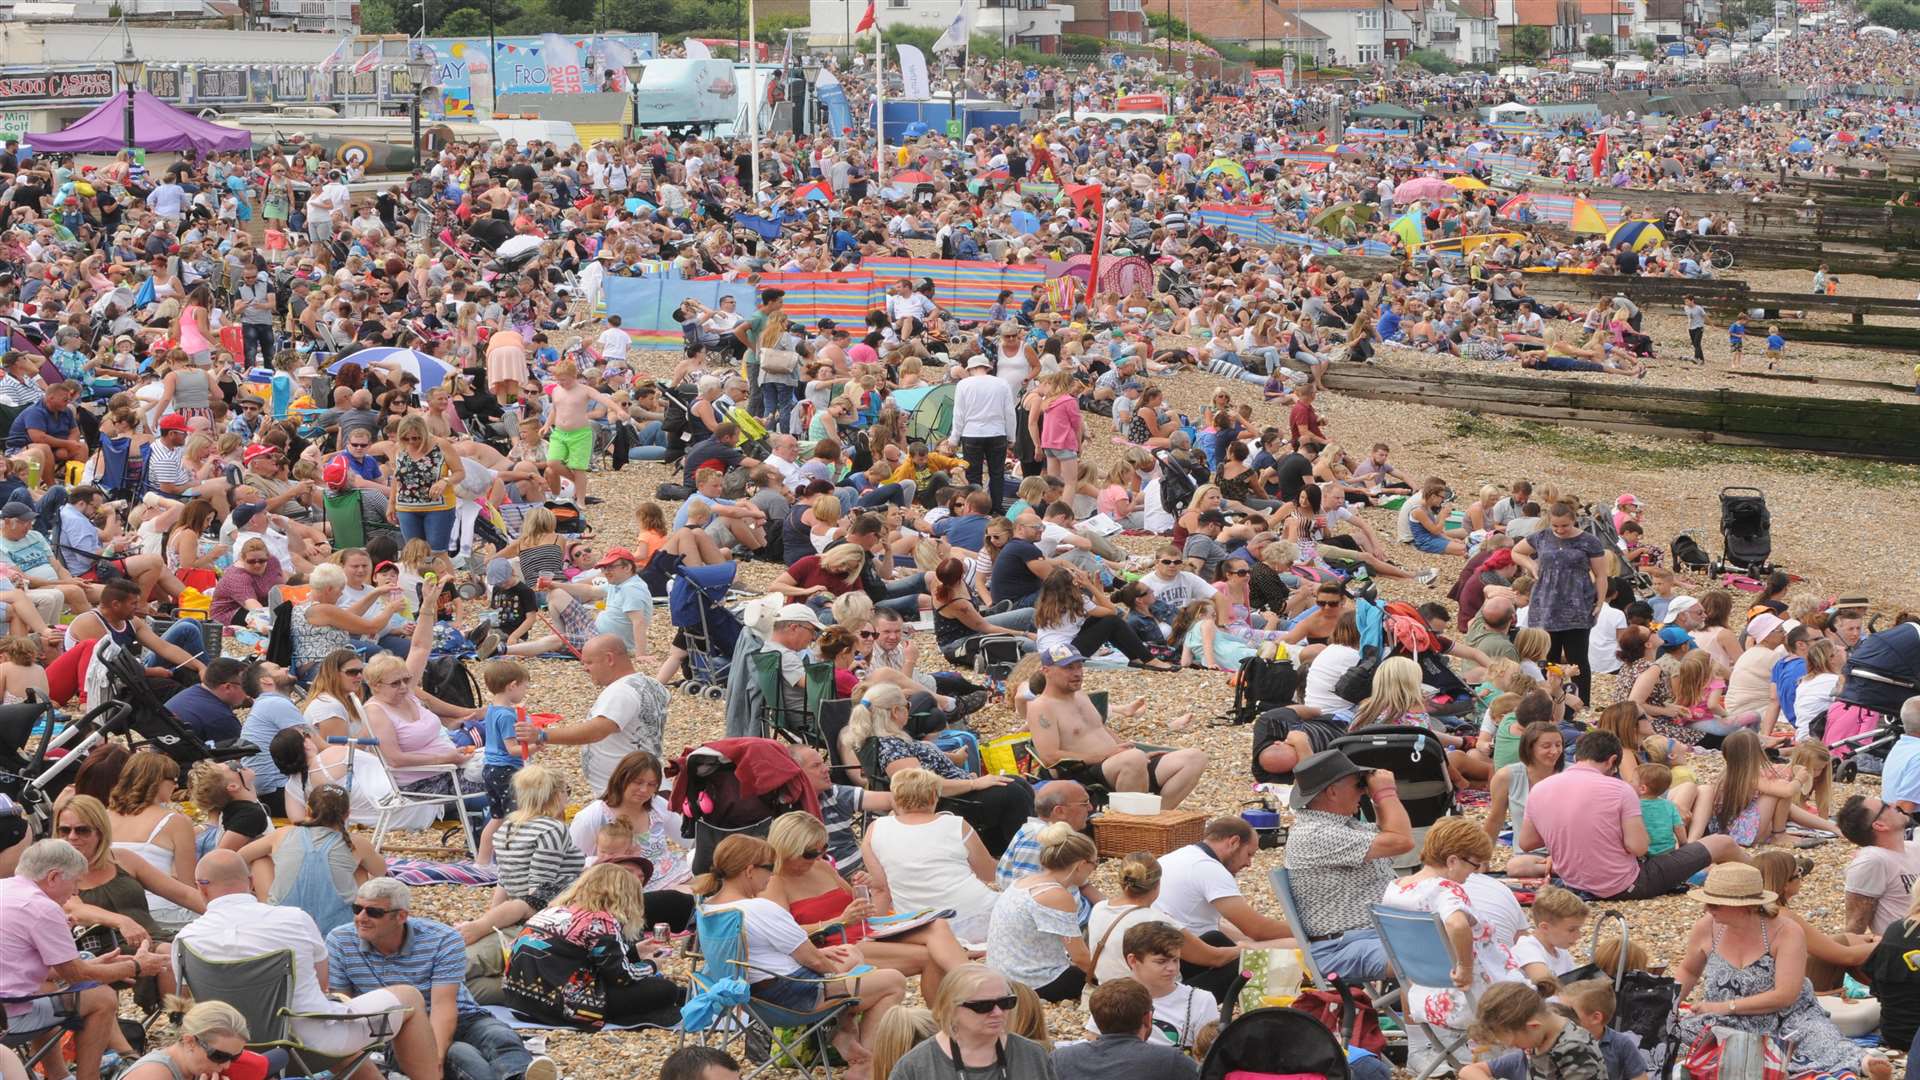 Thousands of people attend the air show